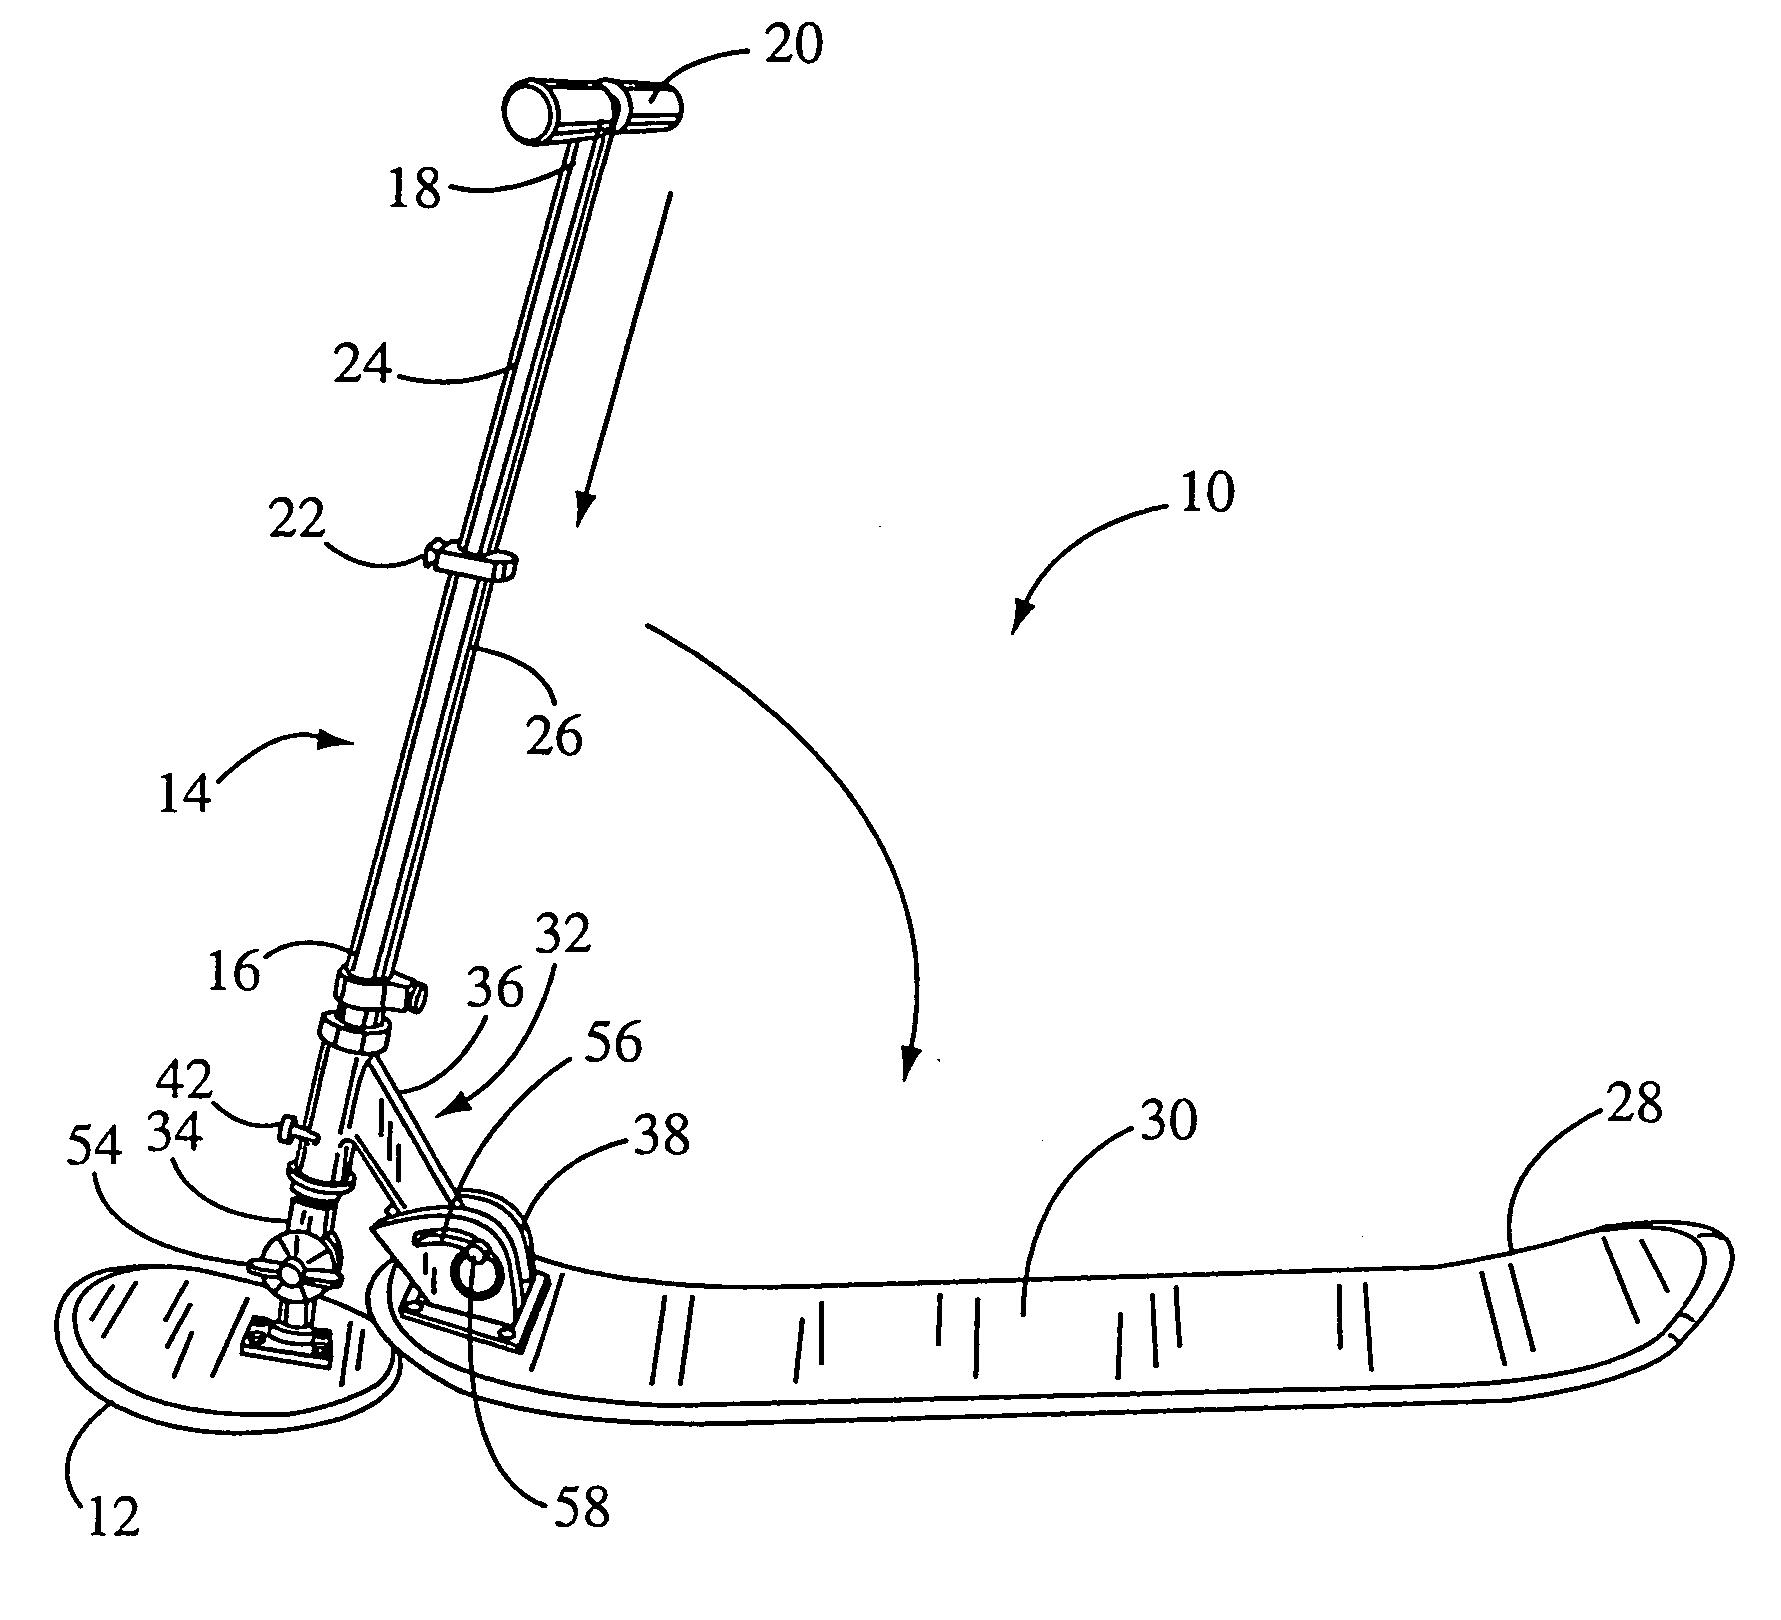 Hand steerable snow scooter